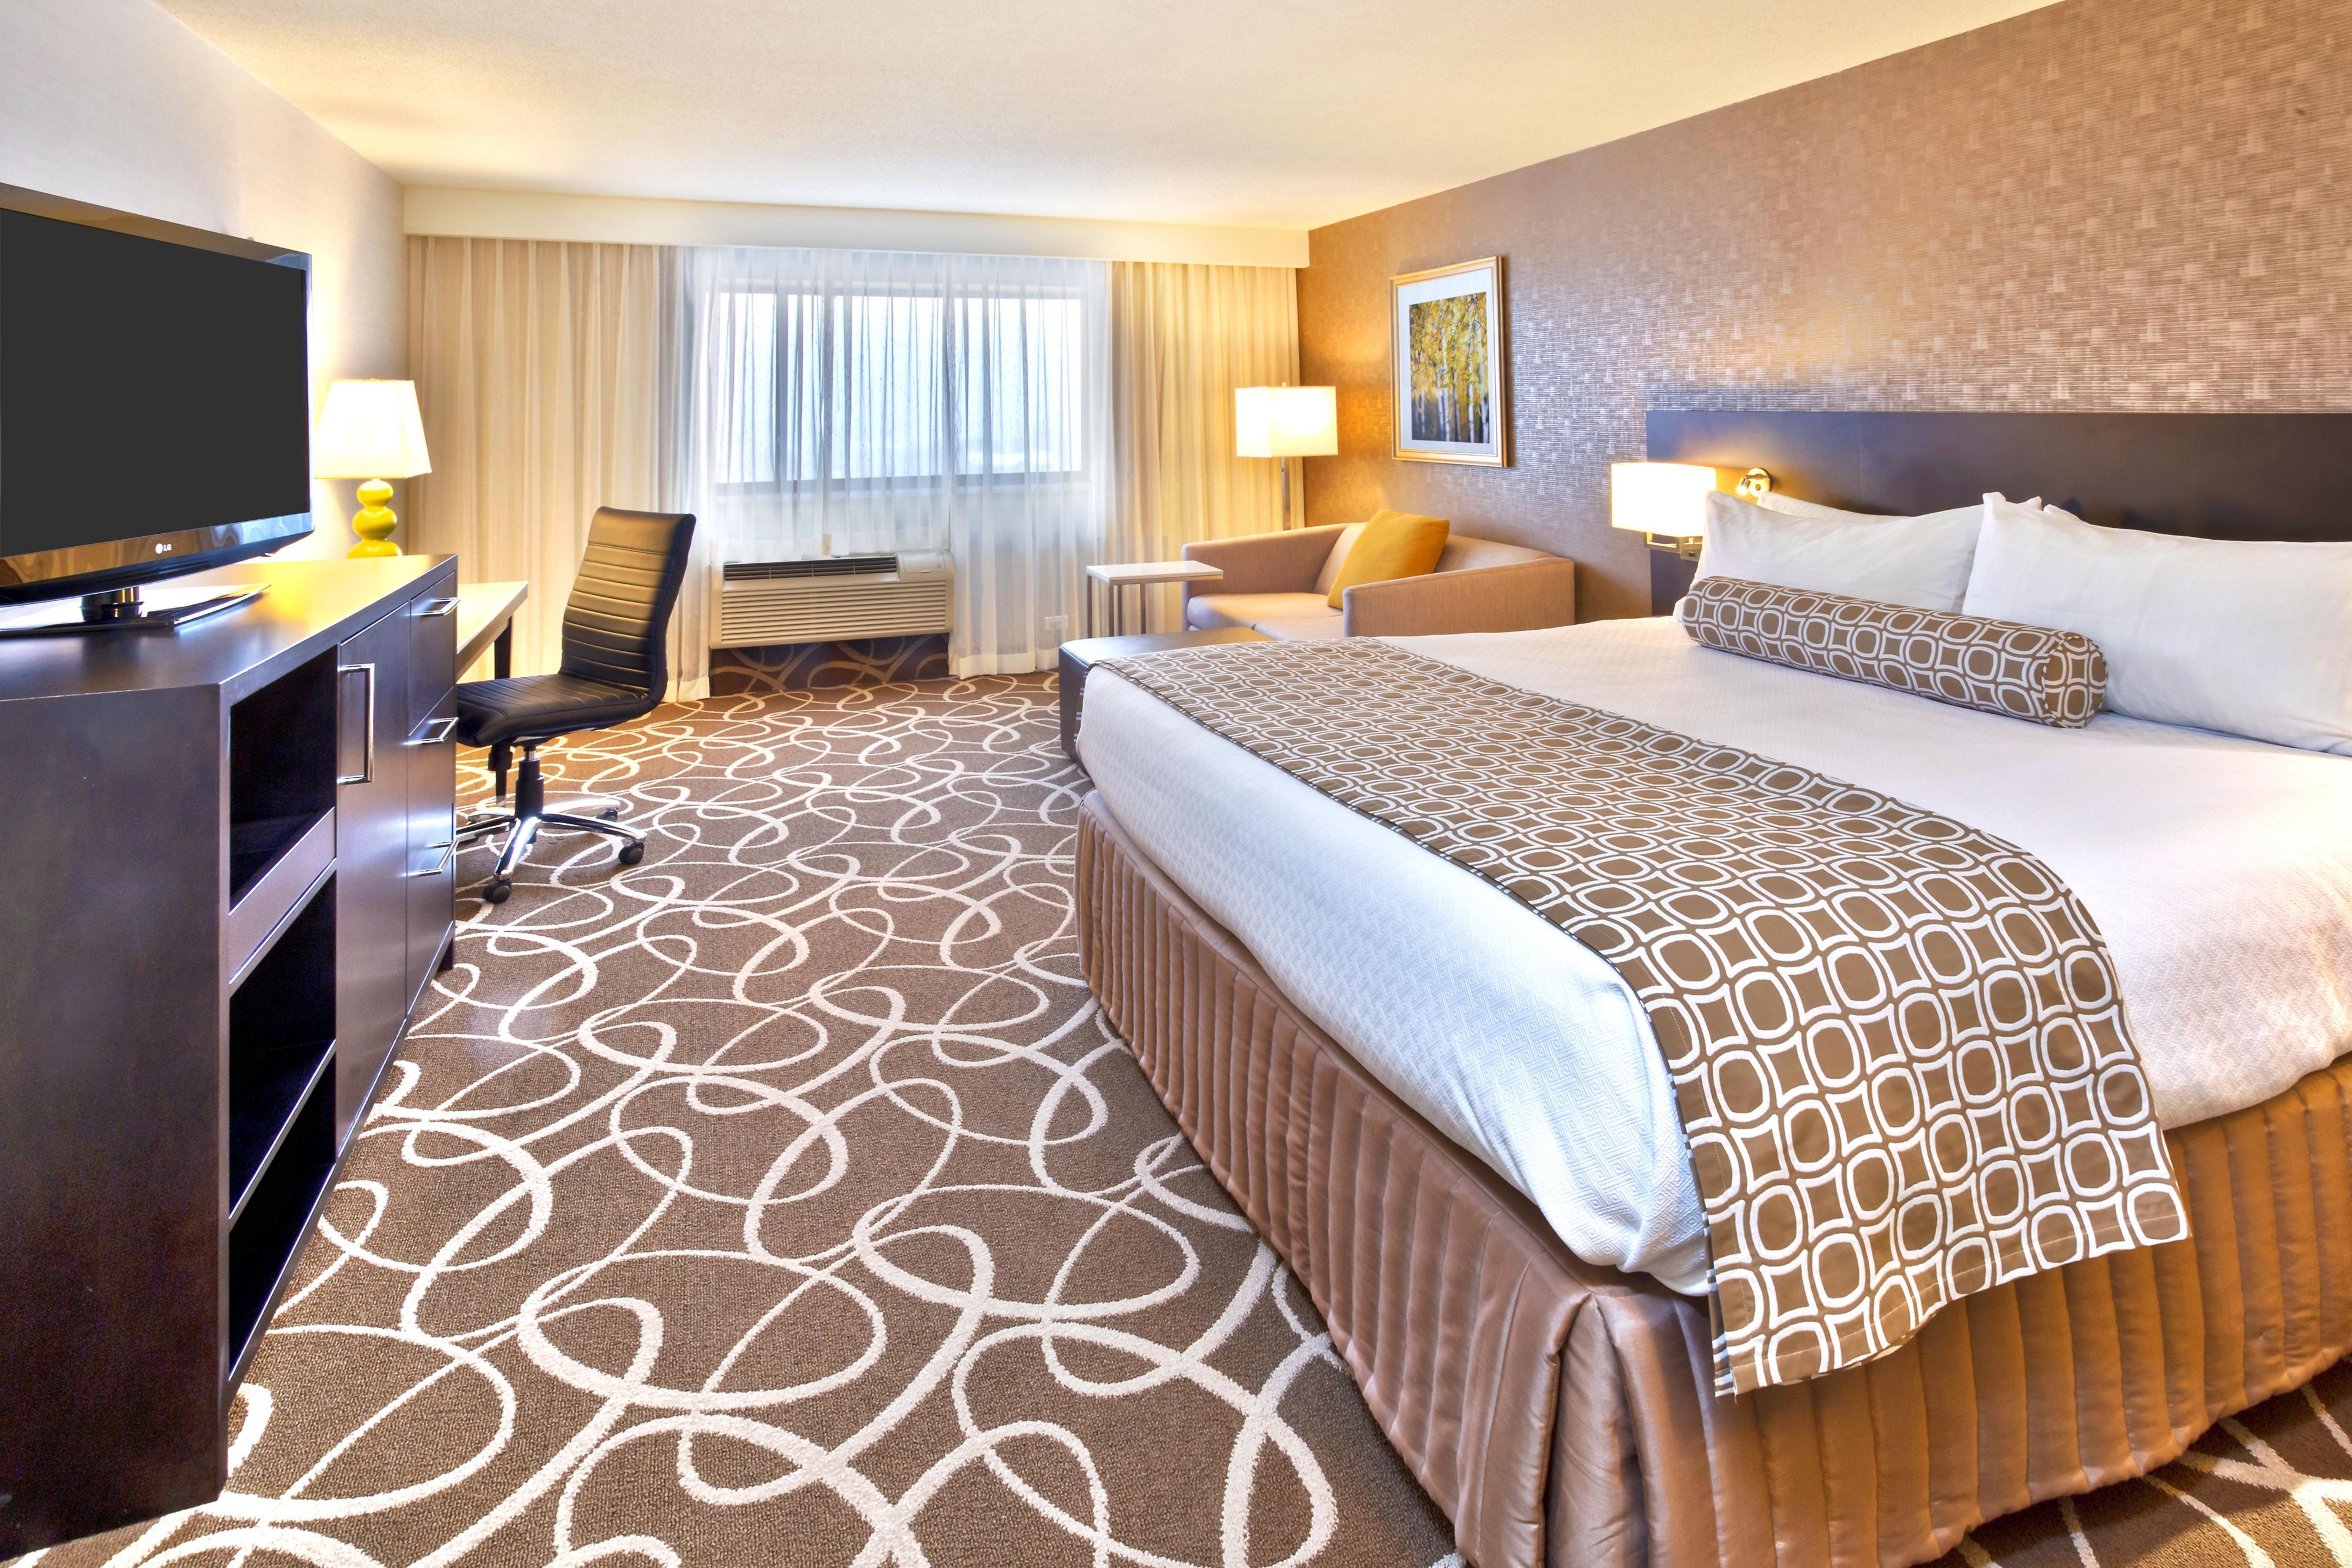 Make yourself at home in our guest rooms.